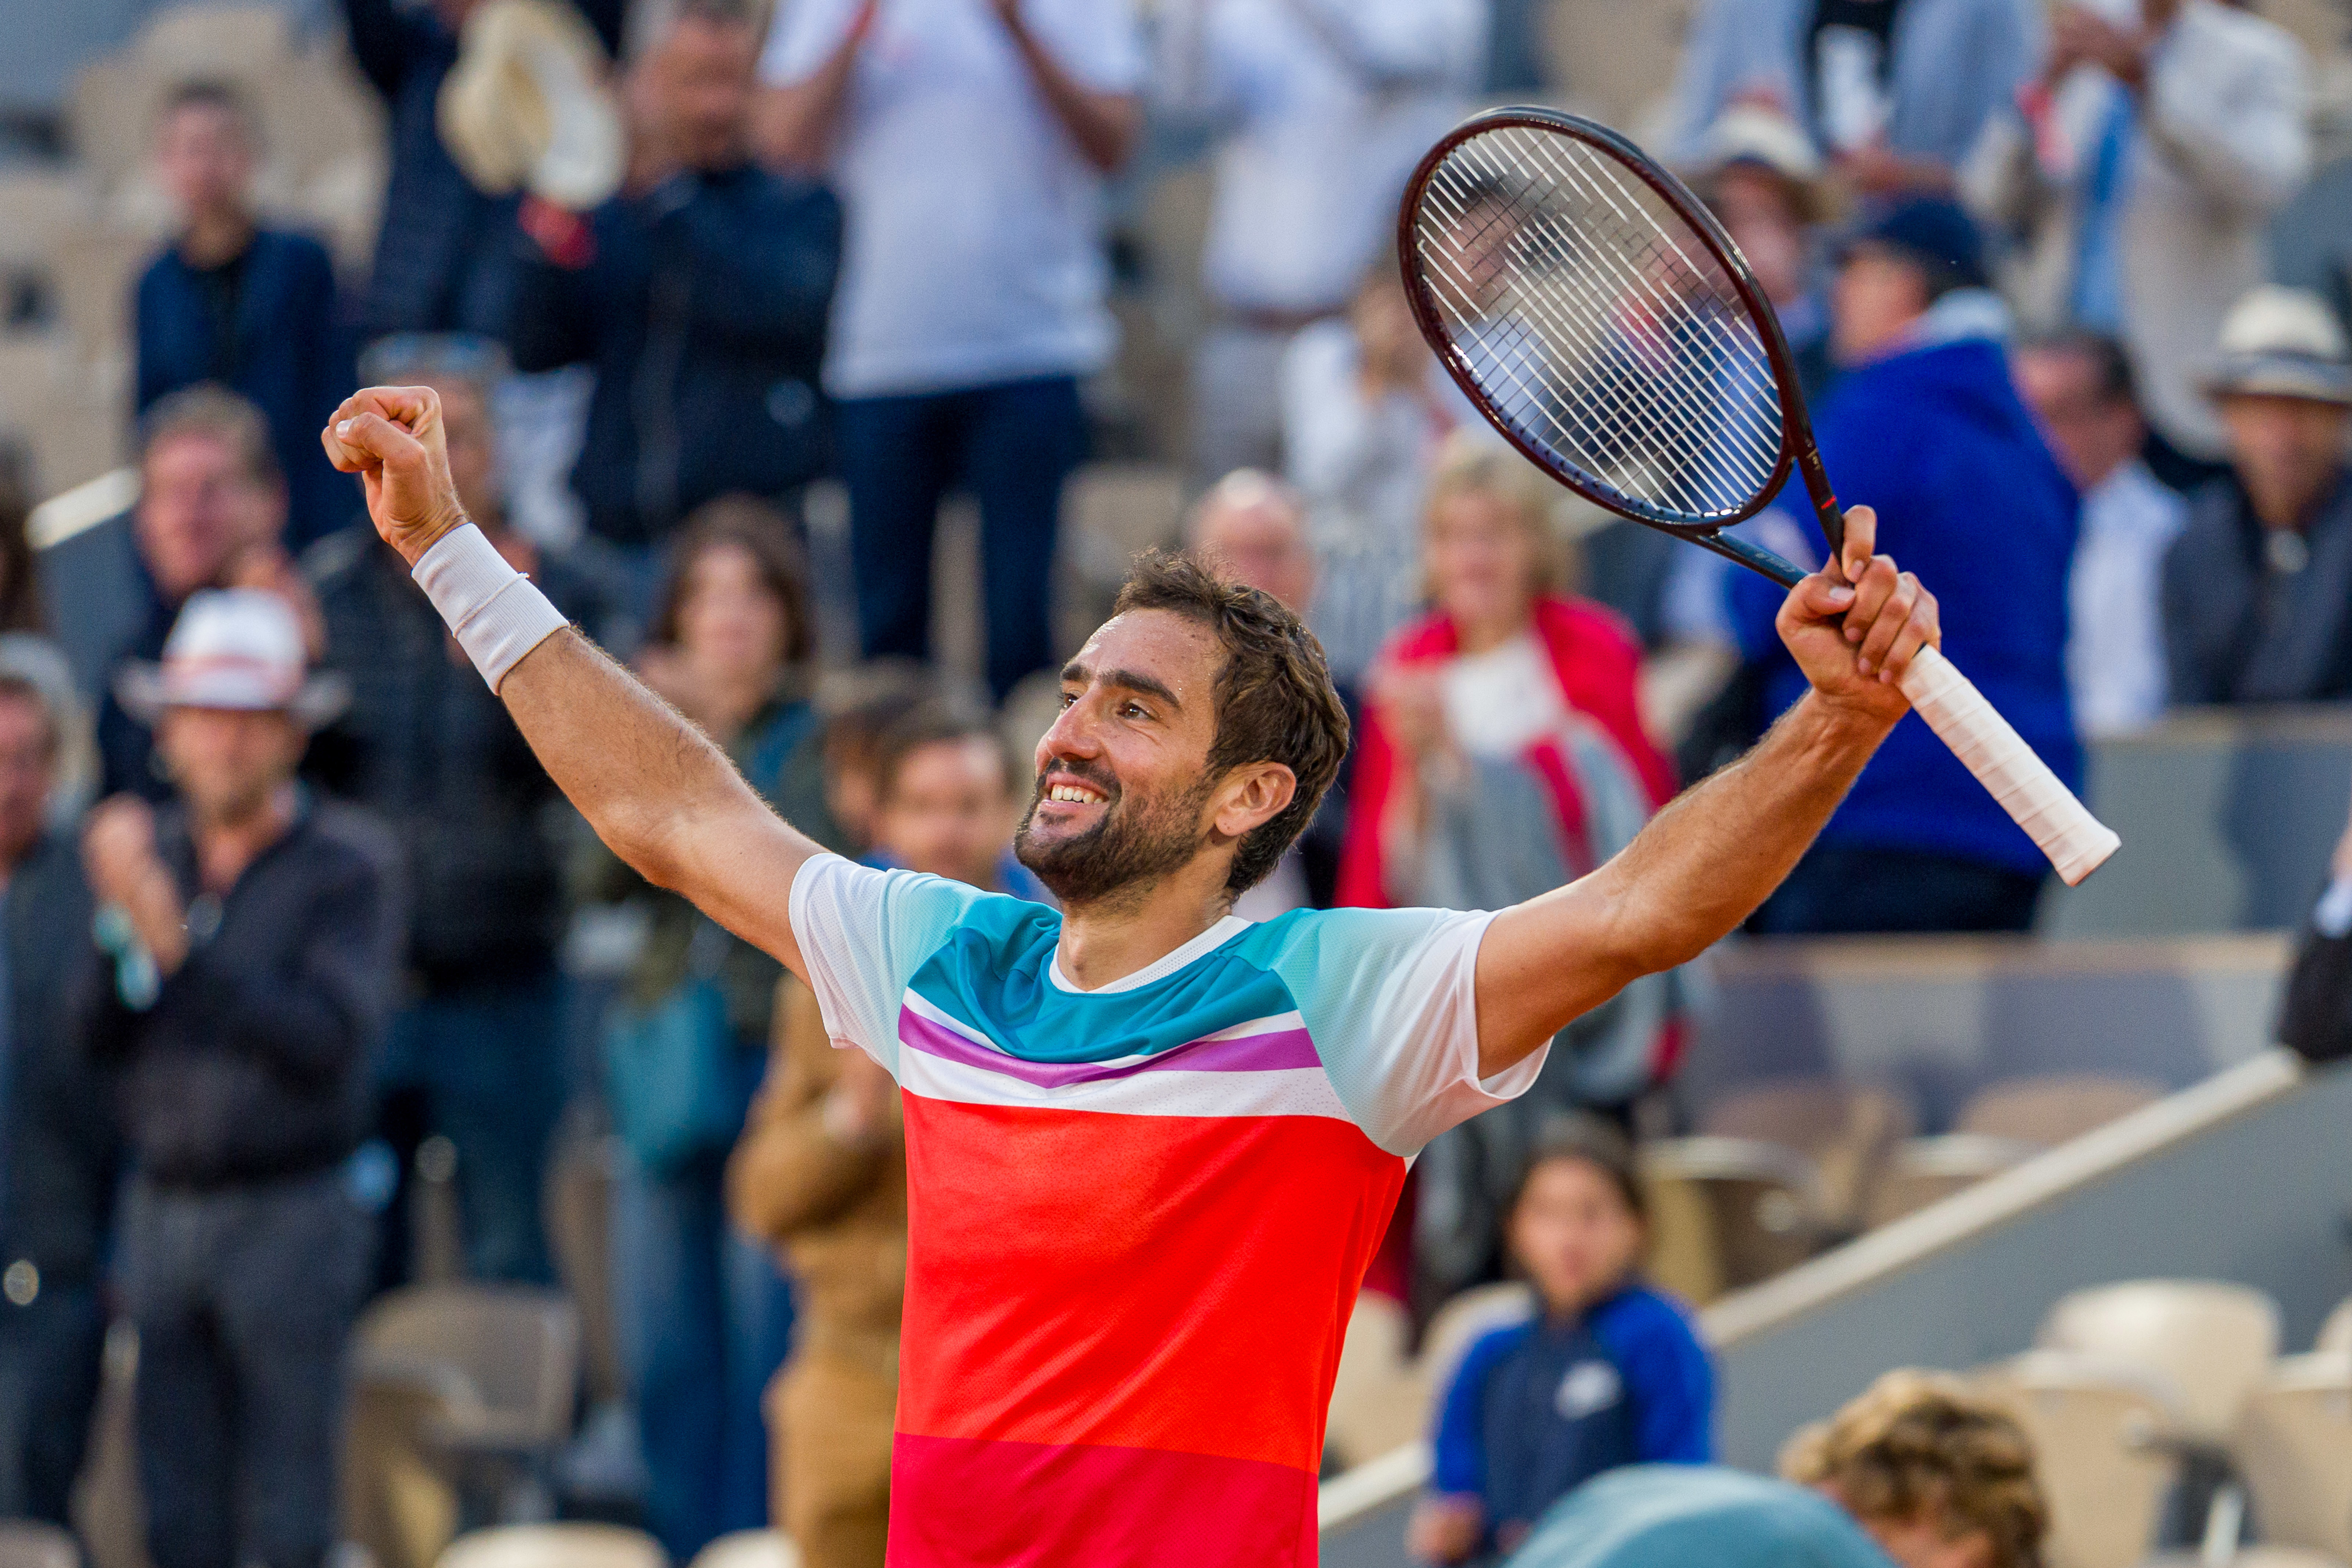 Andrey Rublevs act of sportsmanship leaves tennis world baffled as Cilic advances to first Roland Garros semi at 33